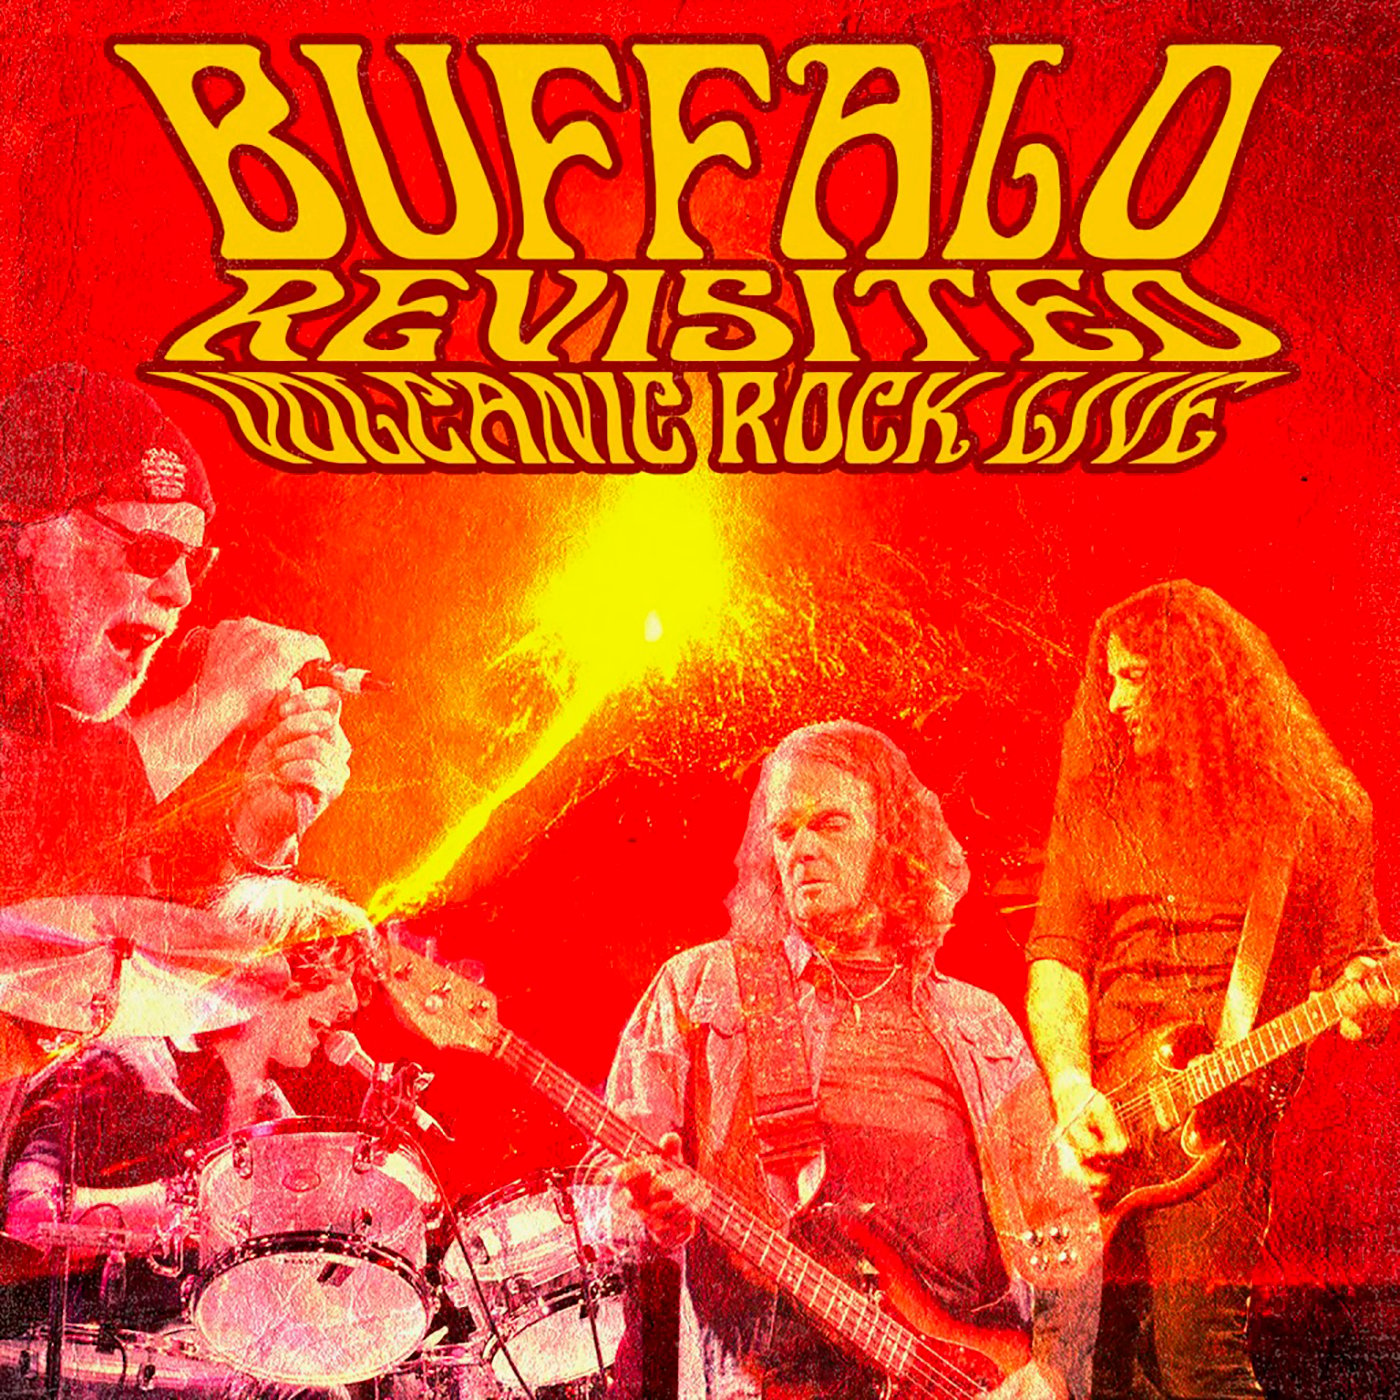 Image of Buffalo Revisited - Volcanic Rock Live Deluxe Vinyl Editions